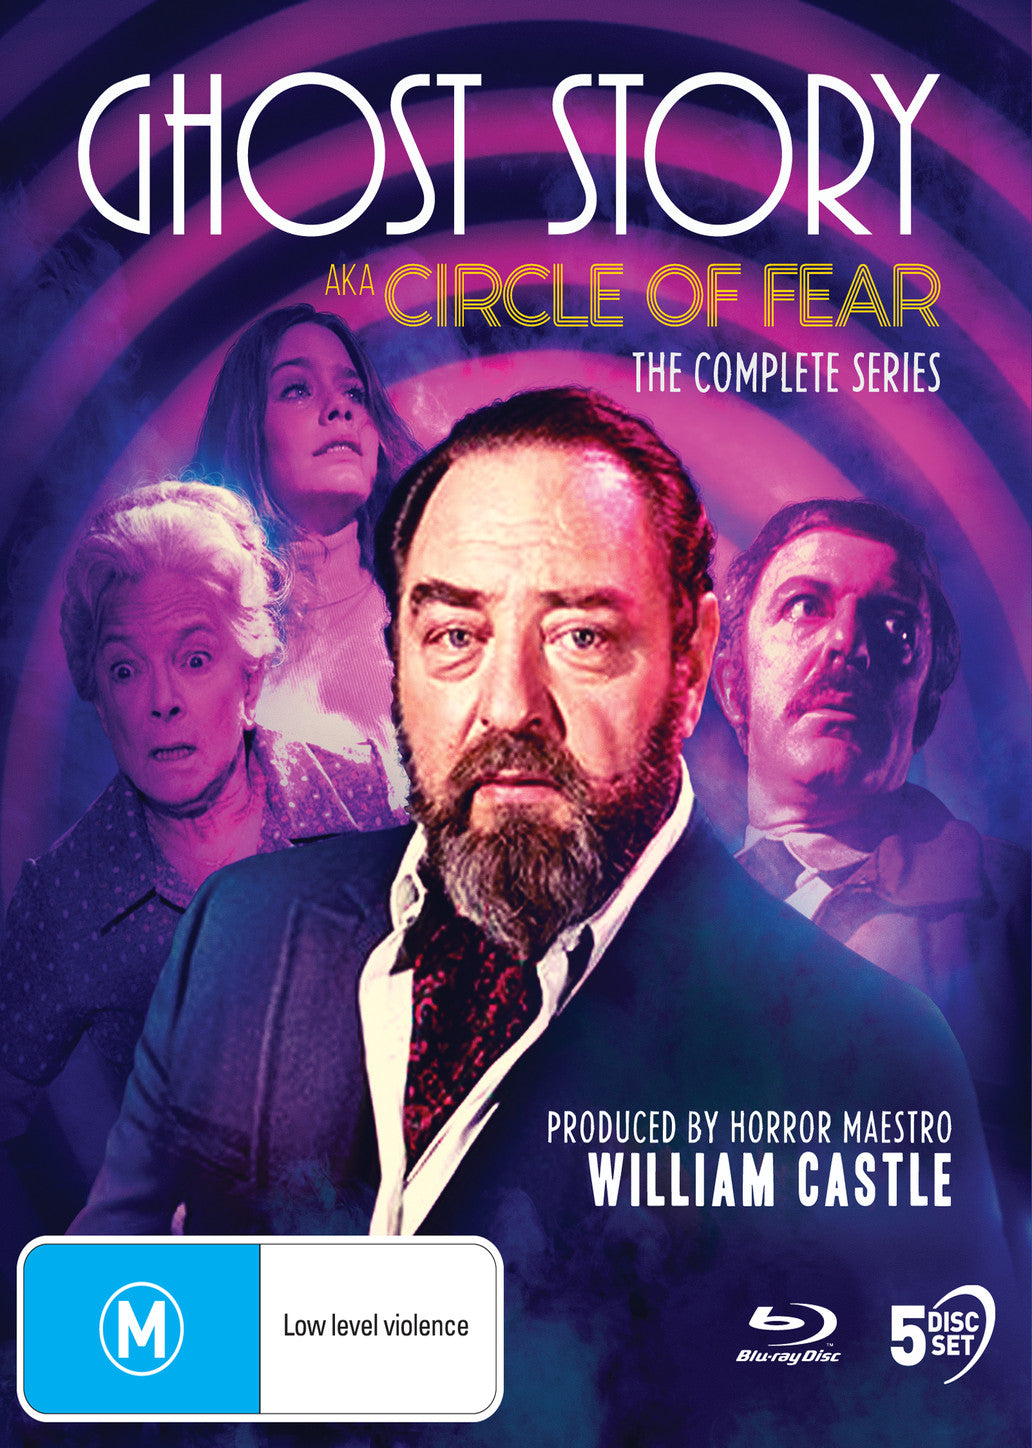 GHOST STORY (AKA CIRCLE OF FEAR) - THE COMPLETE SERIES BLU RAY